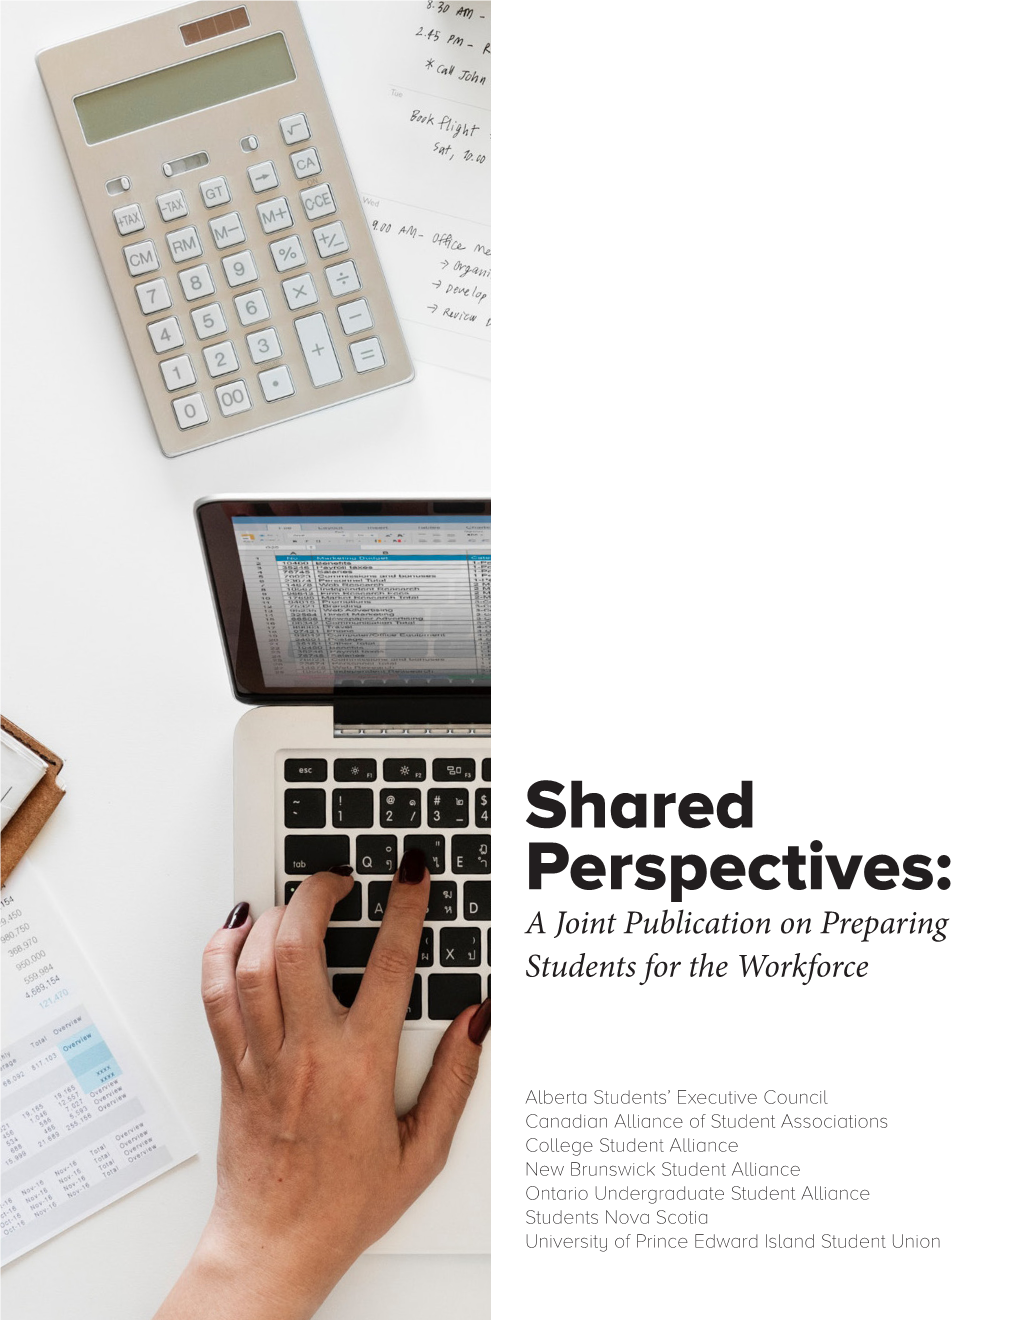 Shared Perspectives: a Joint Publication on Preparing Students for the Workforce